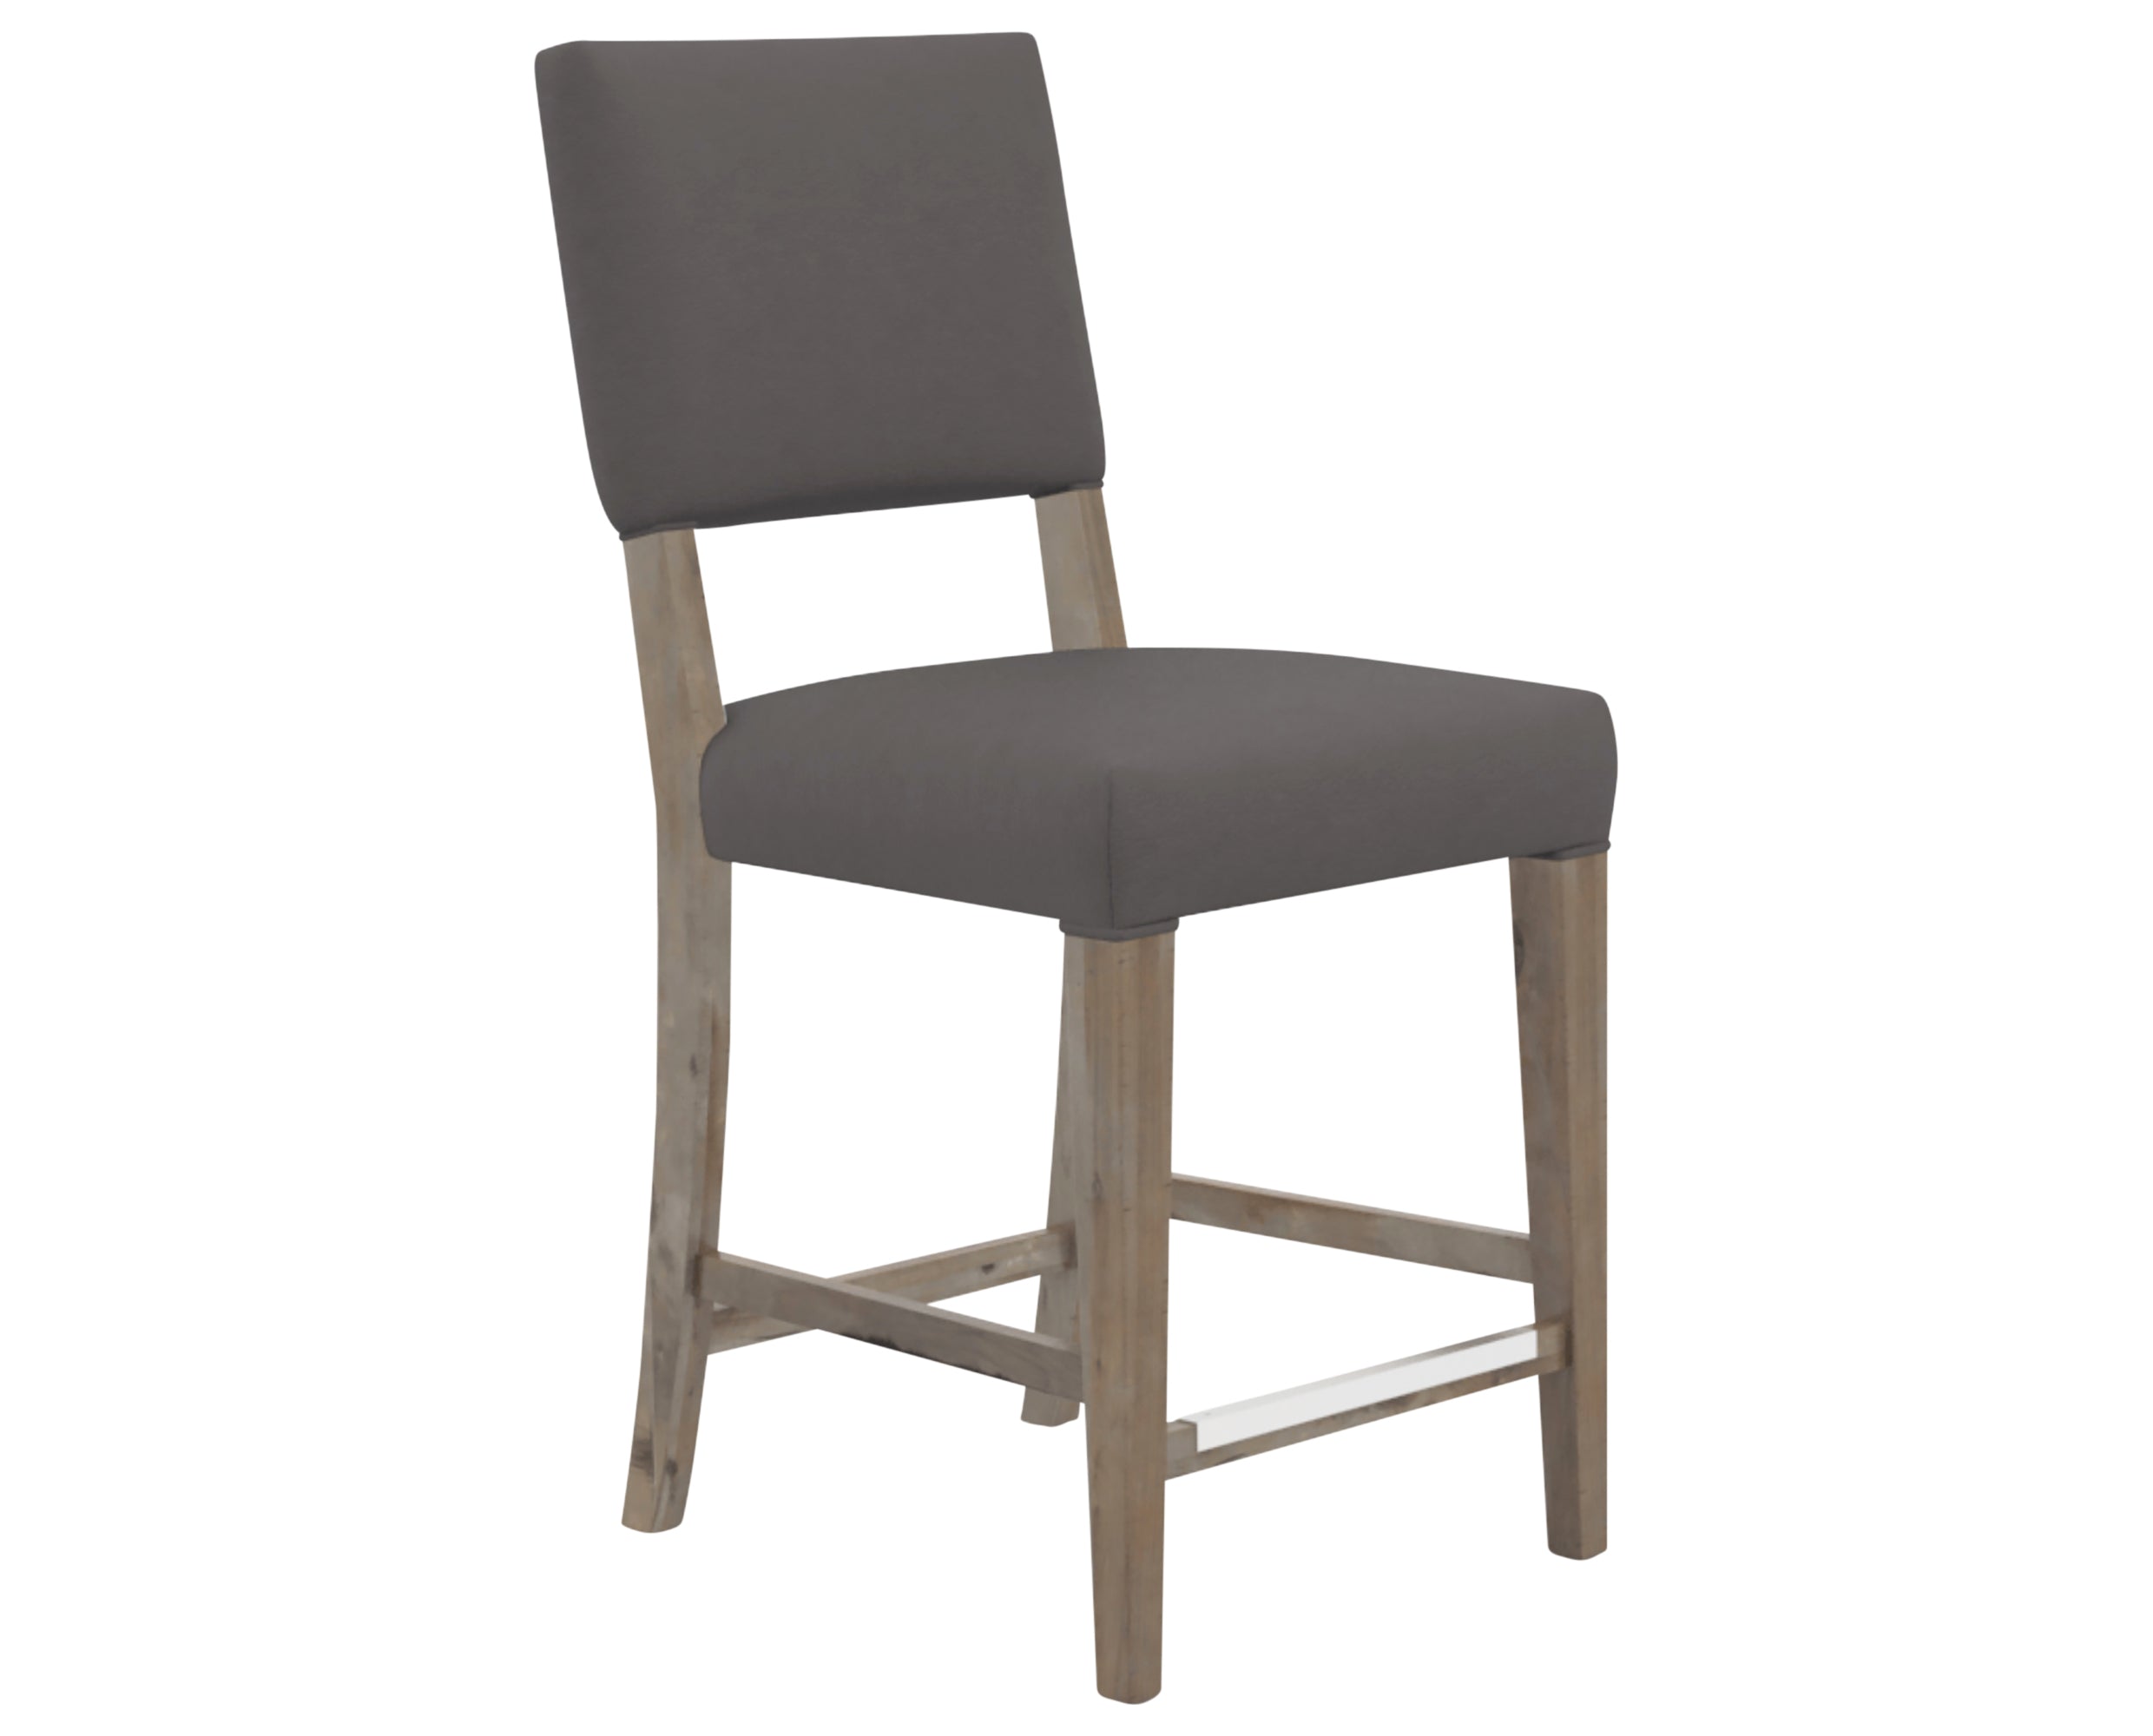 Shadow &amp; Faux Leather XU | Canadel Loft Counter Stool 8051 | Valley Ridge Furniture